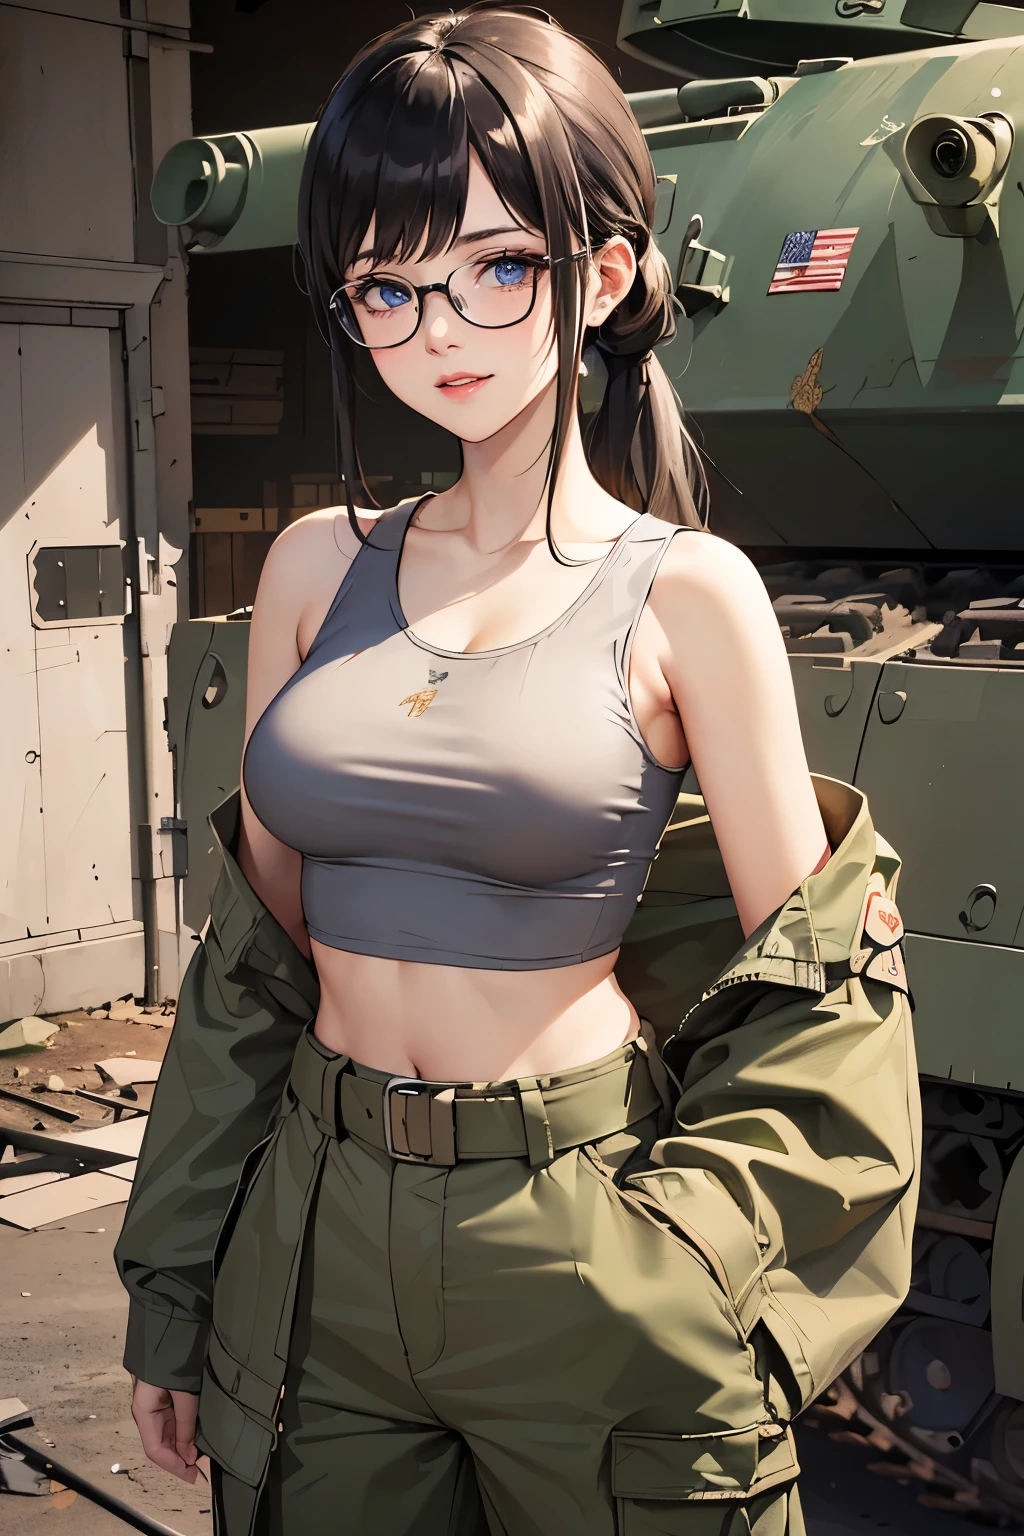 ((wide angle image)), beautiful female veteran, black hair in a ponytail, bangs, wearing large glasses, covering a wound, injured, smiling confidently, (((wearing a white military tank top, layered with a ww2 Oversized military shirt , wearing ww2 military pants Oversized, Off shoulders, Distressed, worn-out))), on the ww2 battlefield